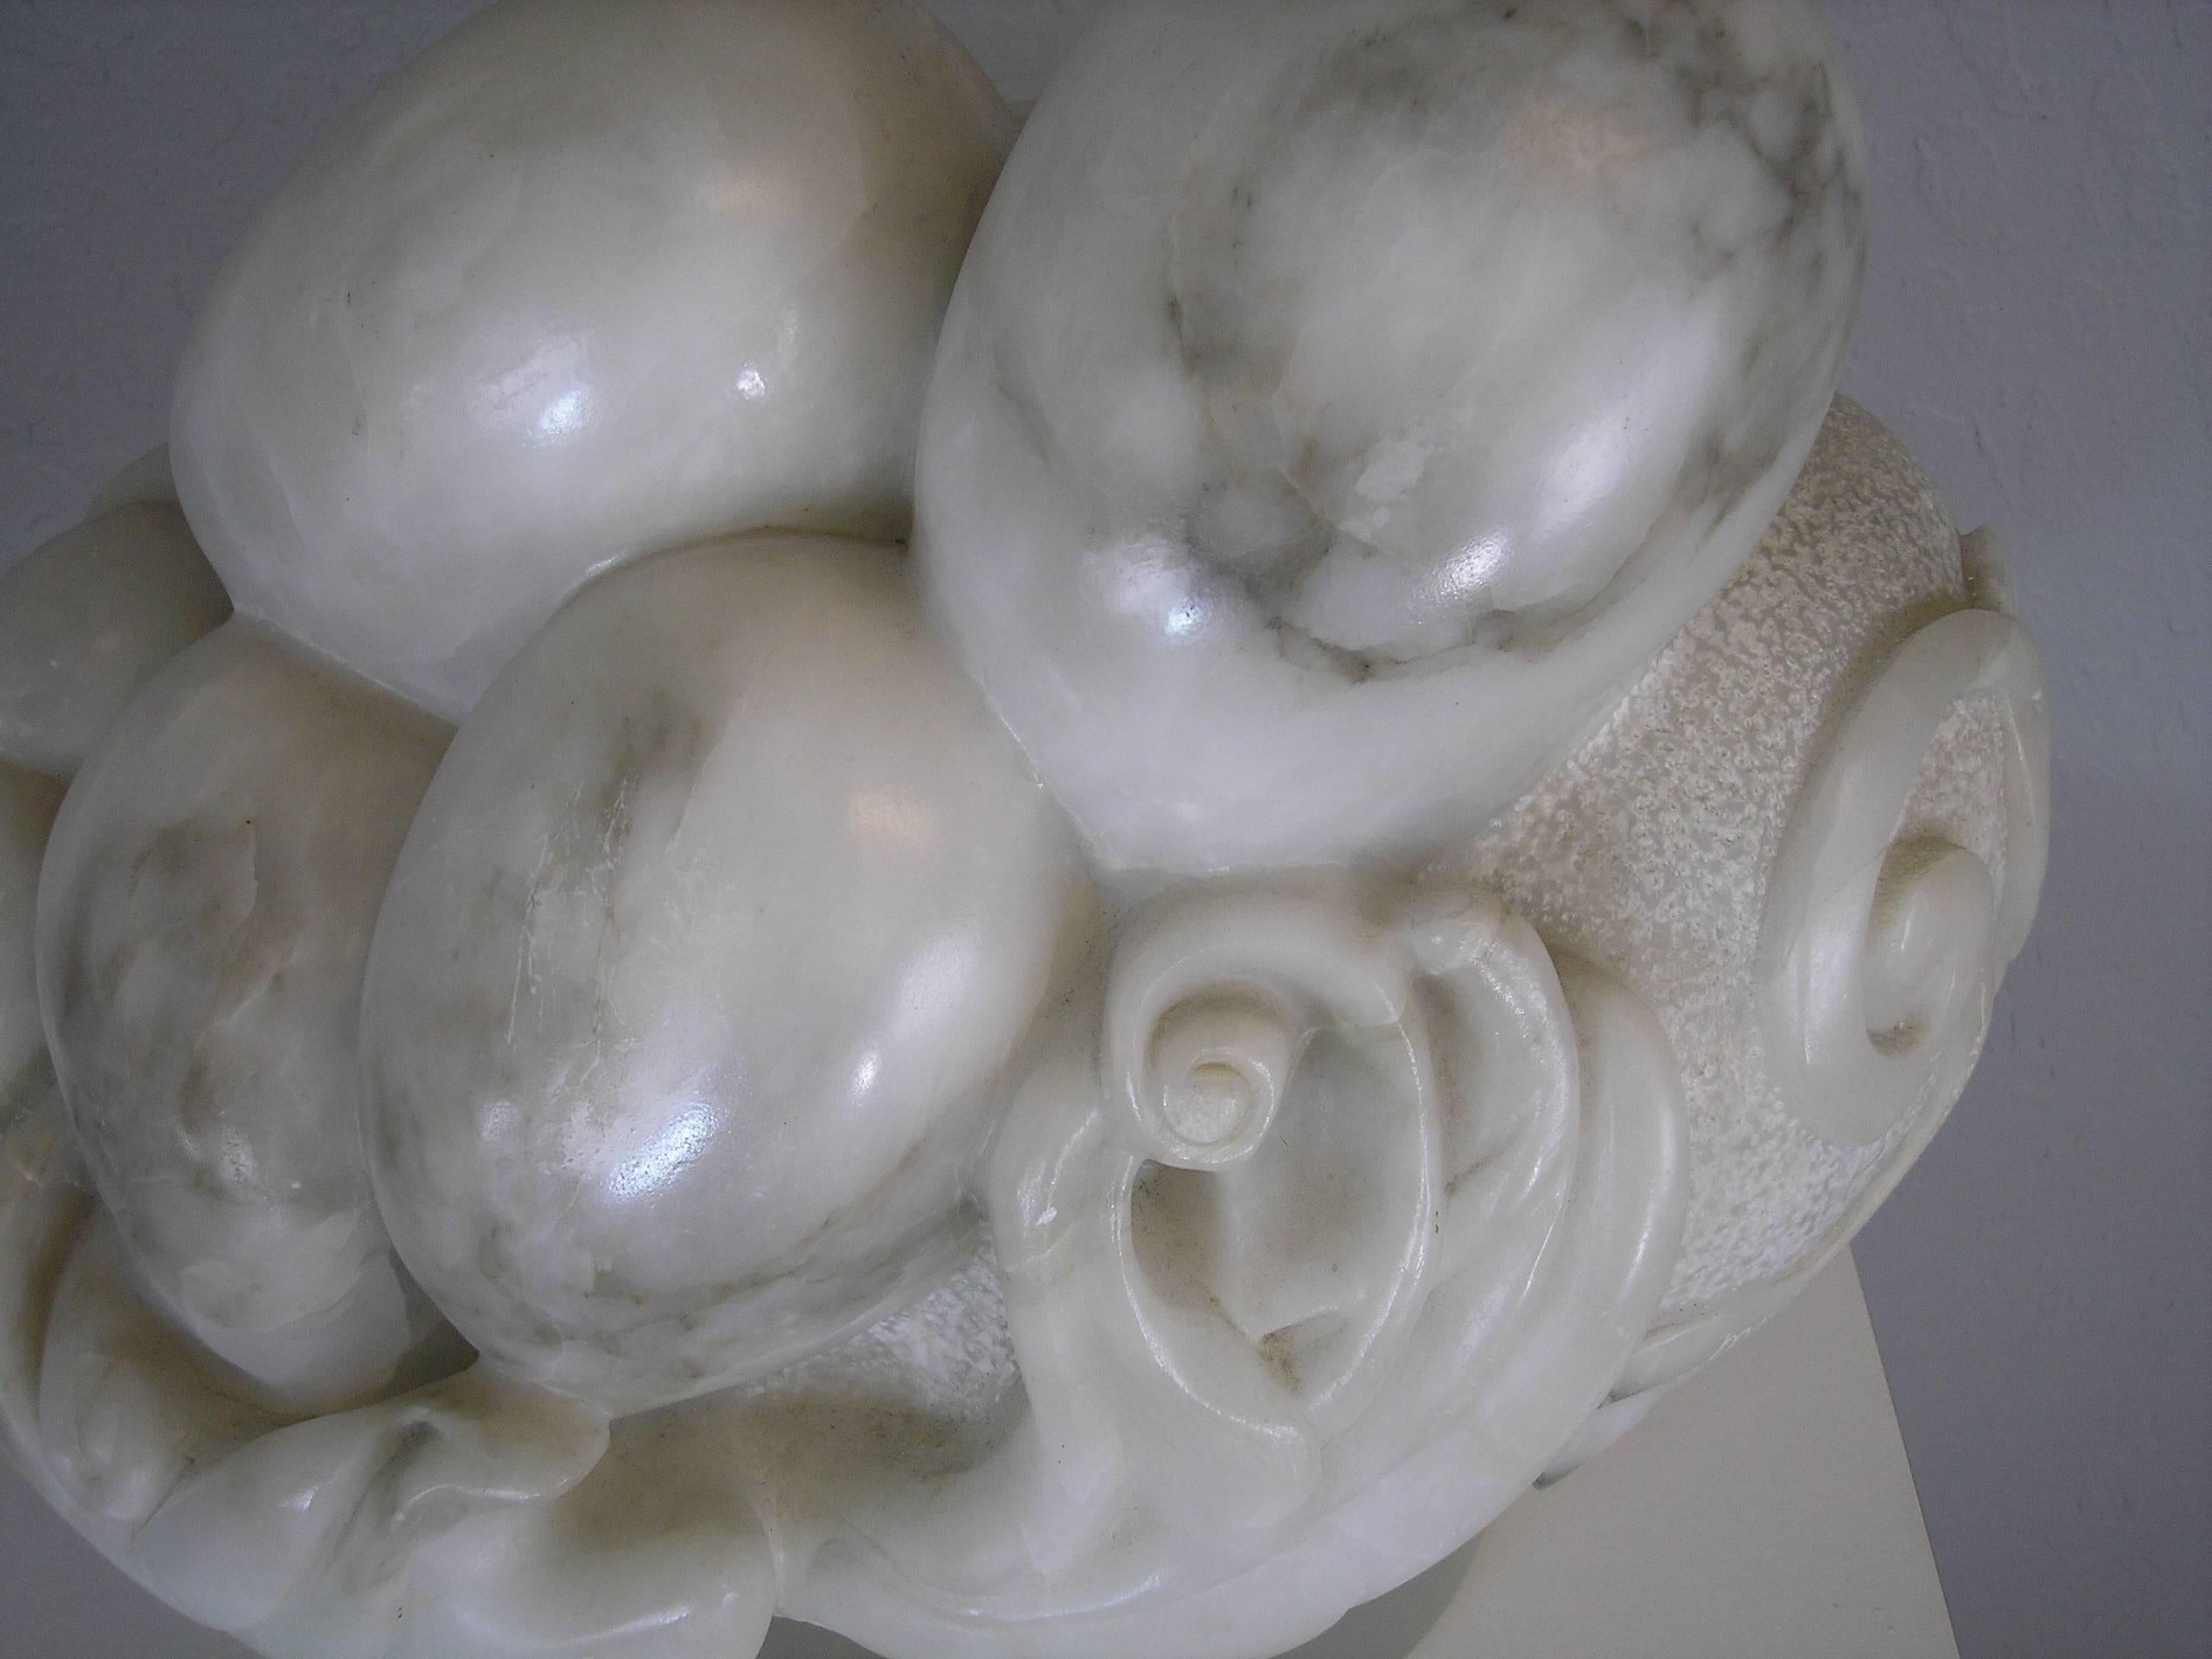 Marble sculpture by Marion M. Sussler. Dated 1978 and signed. Titled nesting eggs. Excellent condition.